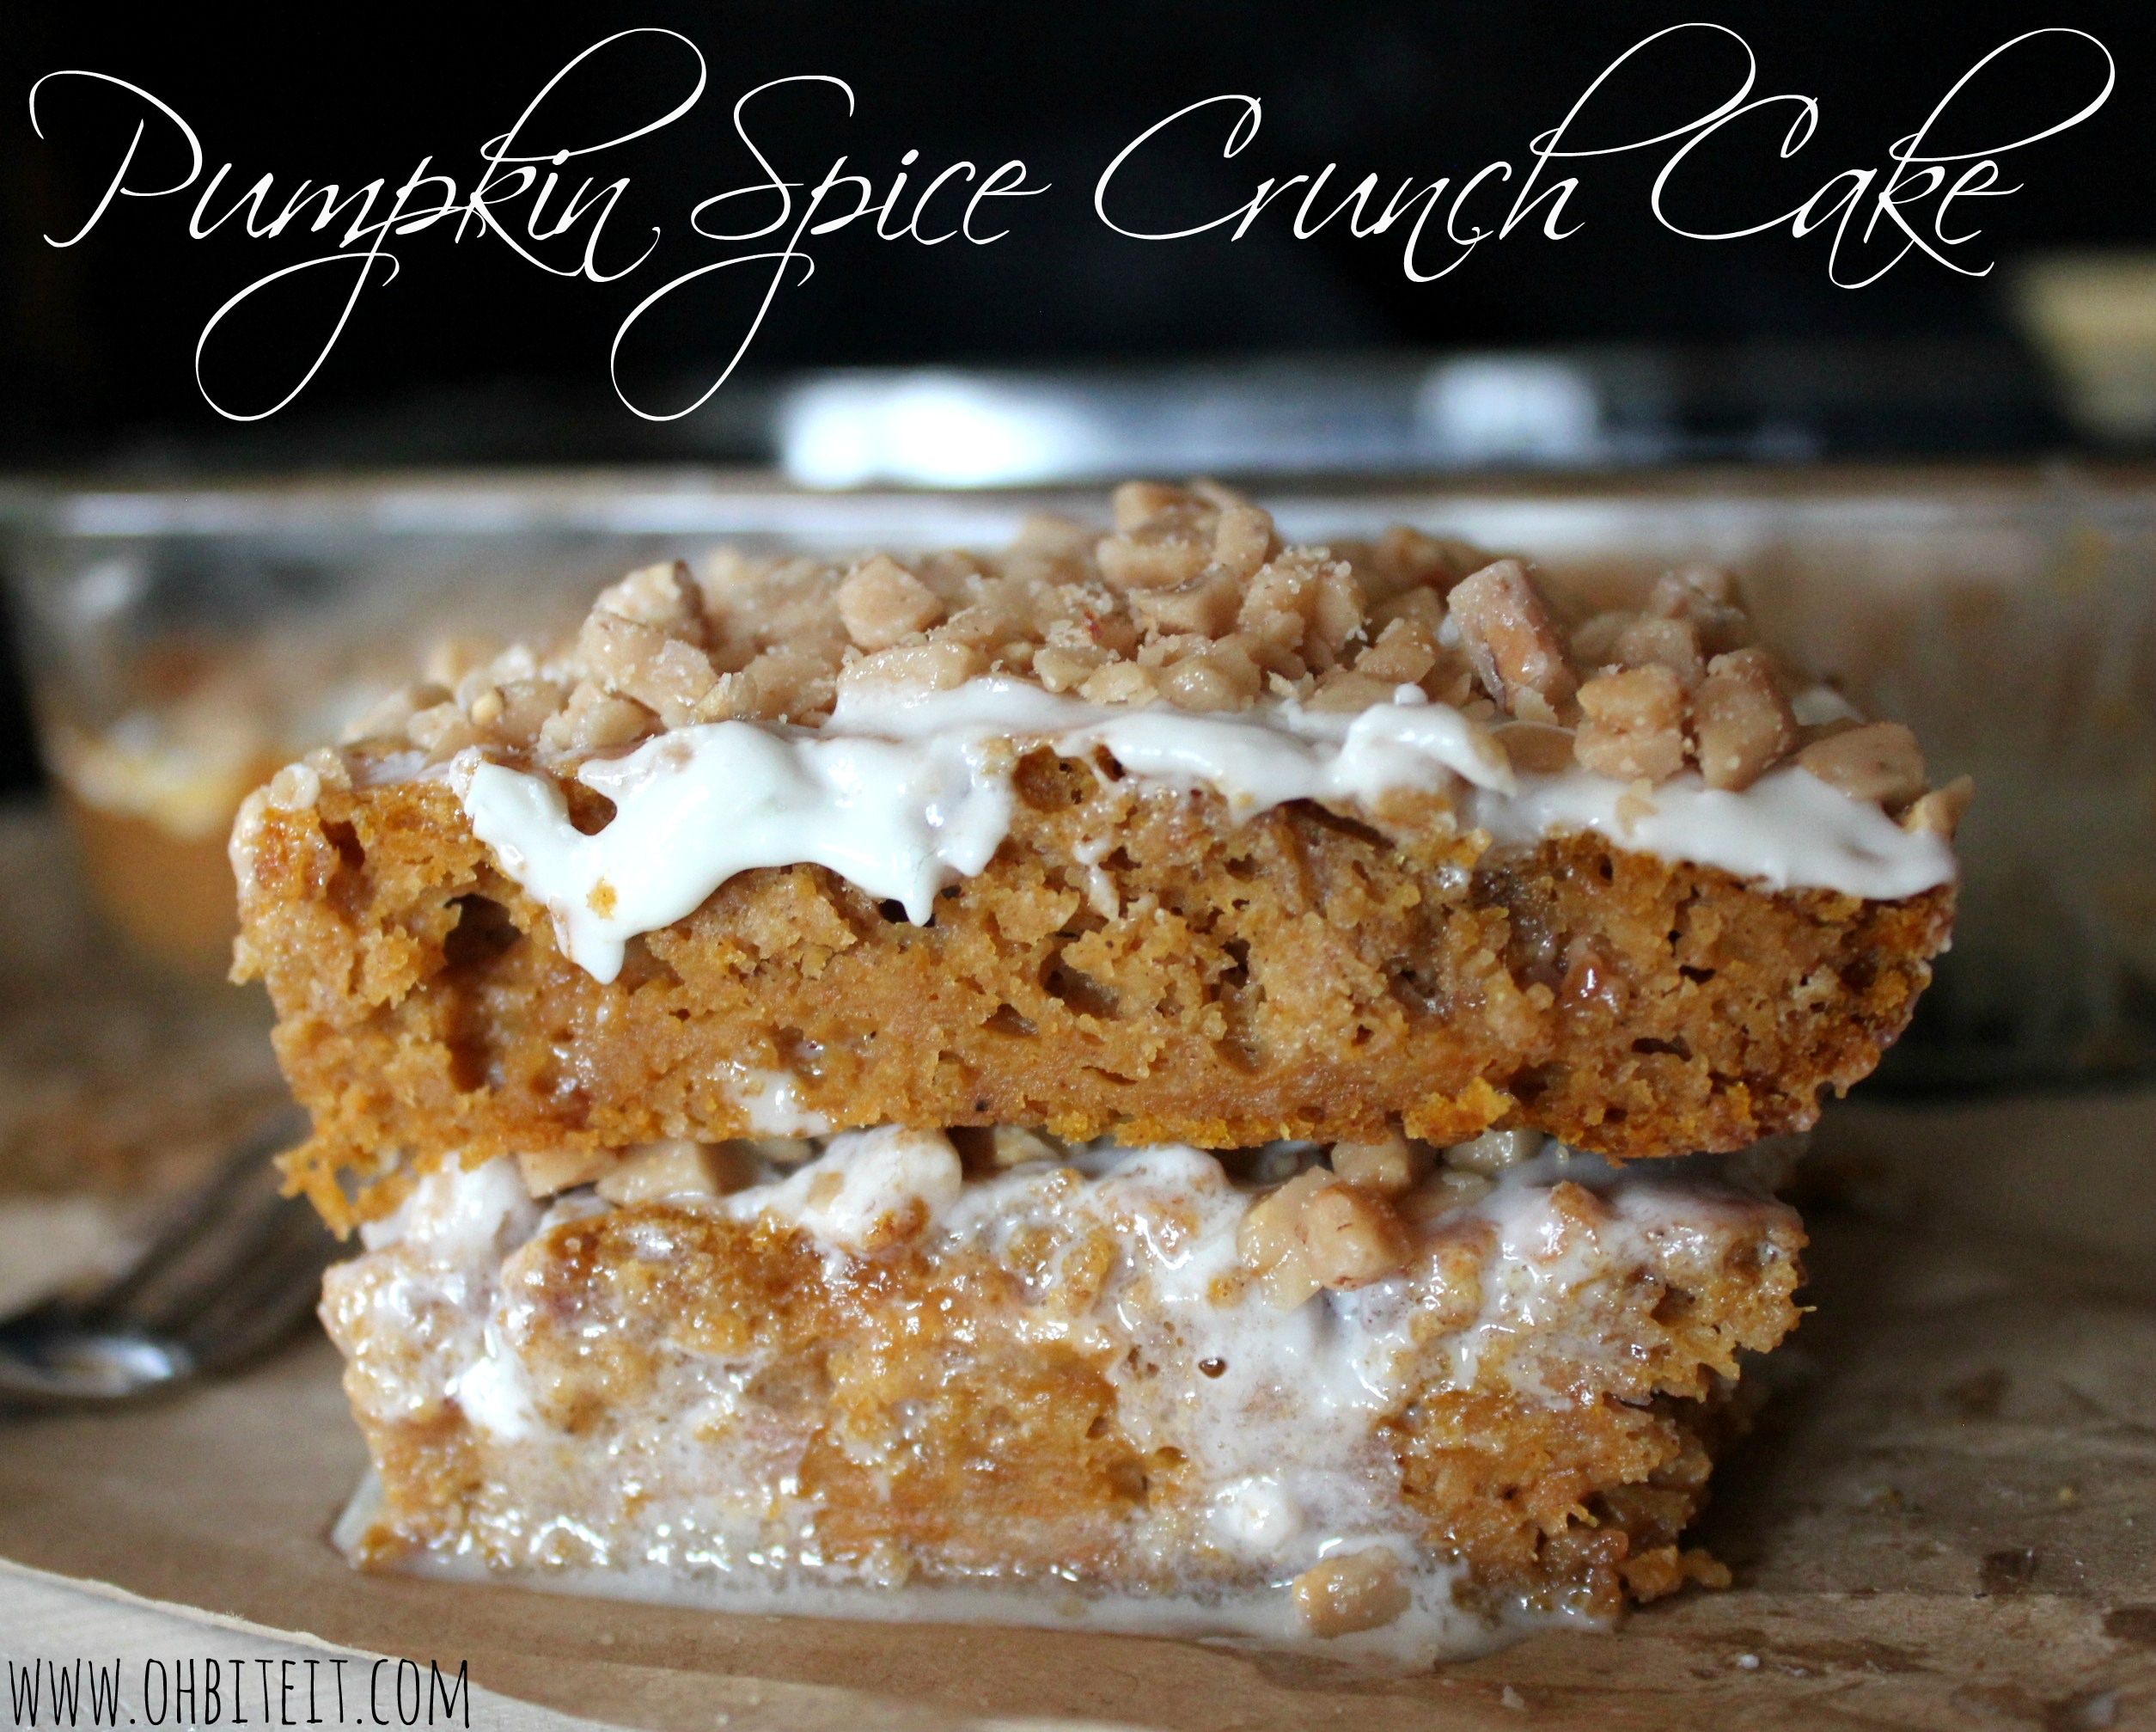 Two slices of pumpkin spice crunch cake sit atop each other with the baking dish visible in the background